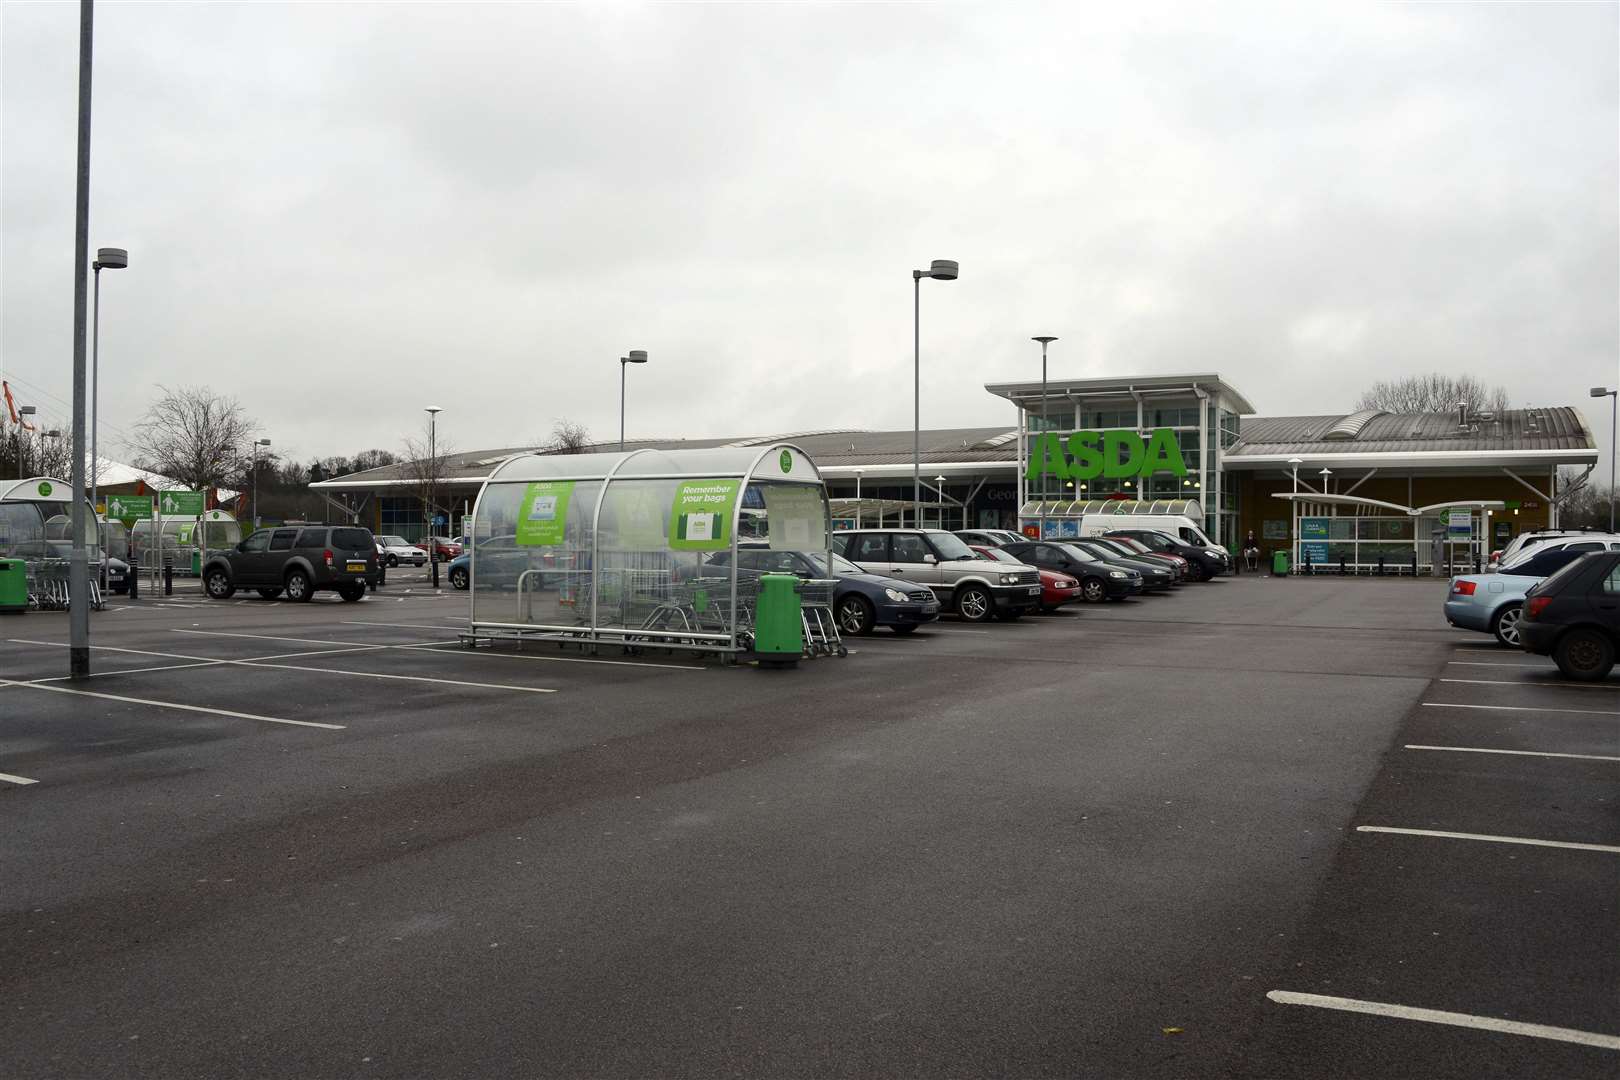 The theft took place at the Ashford branch of Asda